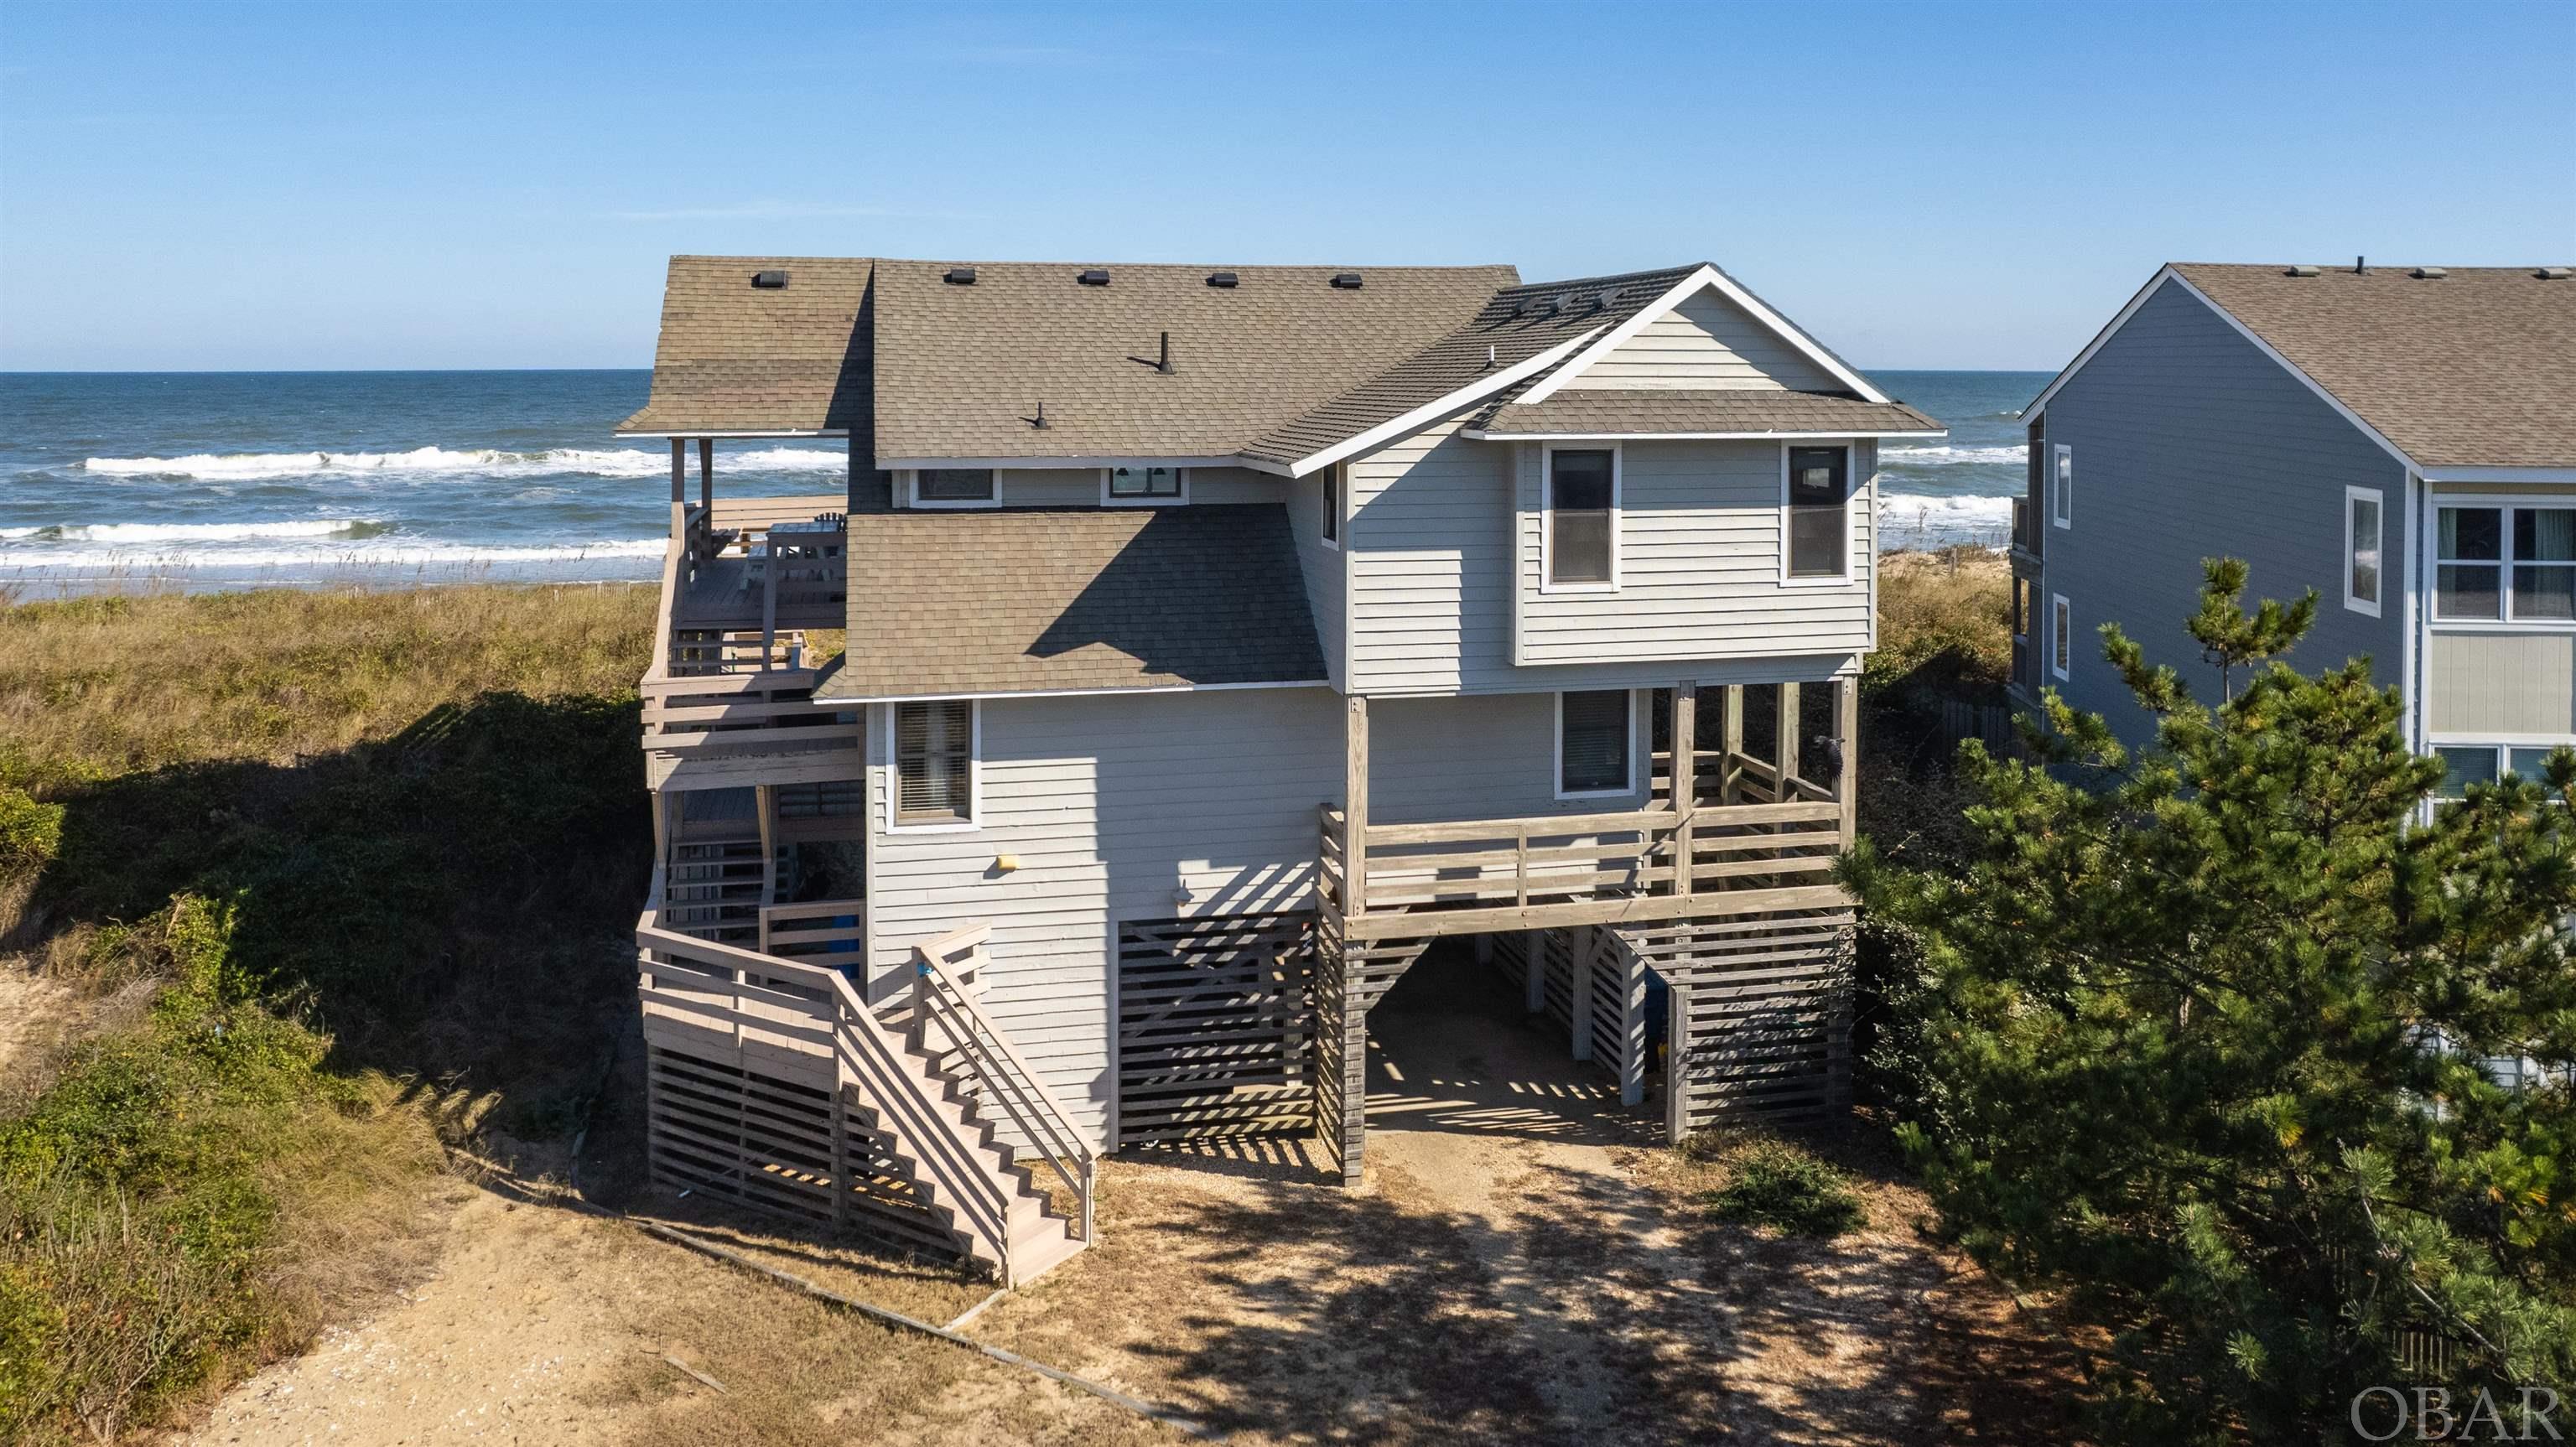 Vintage oceanfront property located on quiet cul-de-sac. 22490 square foot lot with 105 feet of ocean frontage creating many possibilities. Top floor consists of kitchen, living room, dining area, master bedroom, half bathroom and decks galore. Mid-level consists of master bedroom, two additional bedrooms sharing a bathroom, hot tub on outside deck and a media room. Ground floor has utility room, storage area, outside shower and underneath parking. Community amenities include sound front dock for fishing or launching kayaks and numerous nature trails. For additional fee Sanderling community also offers pool, racquet club and gym.